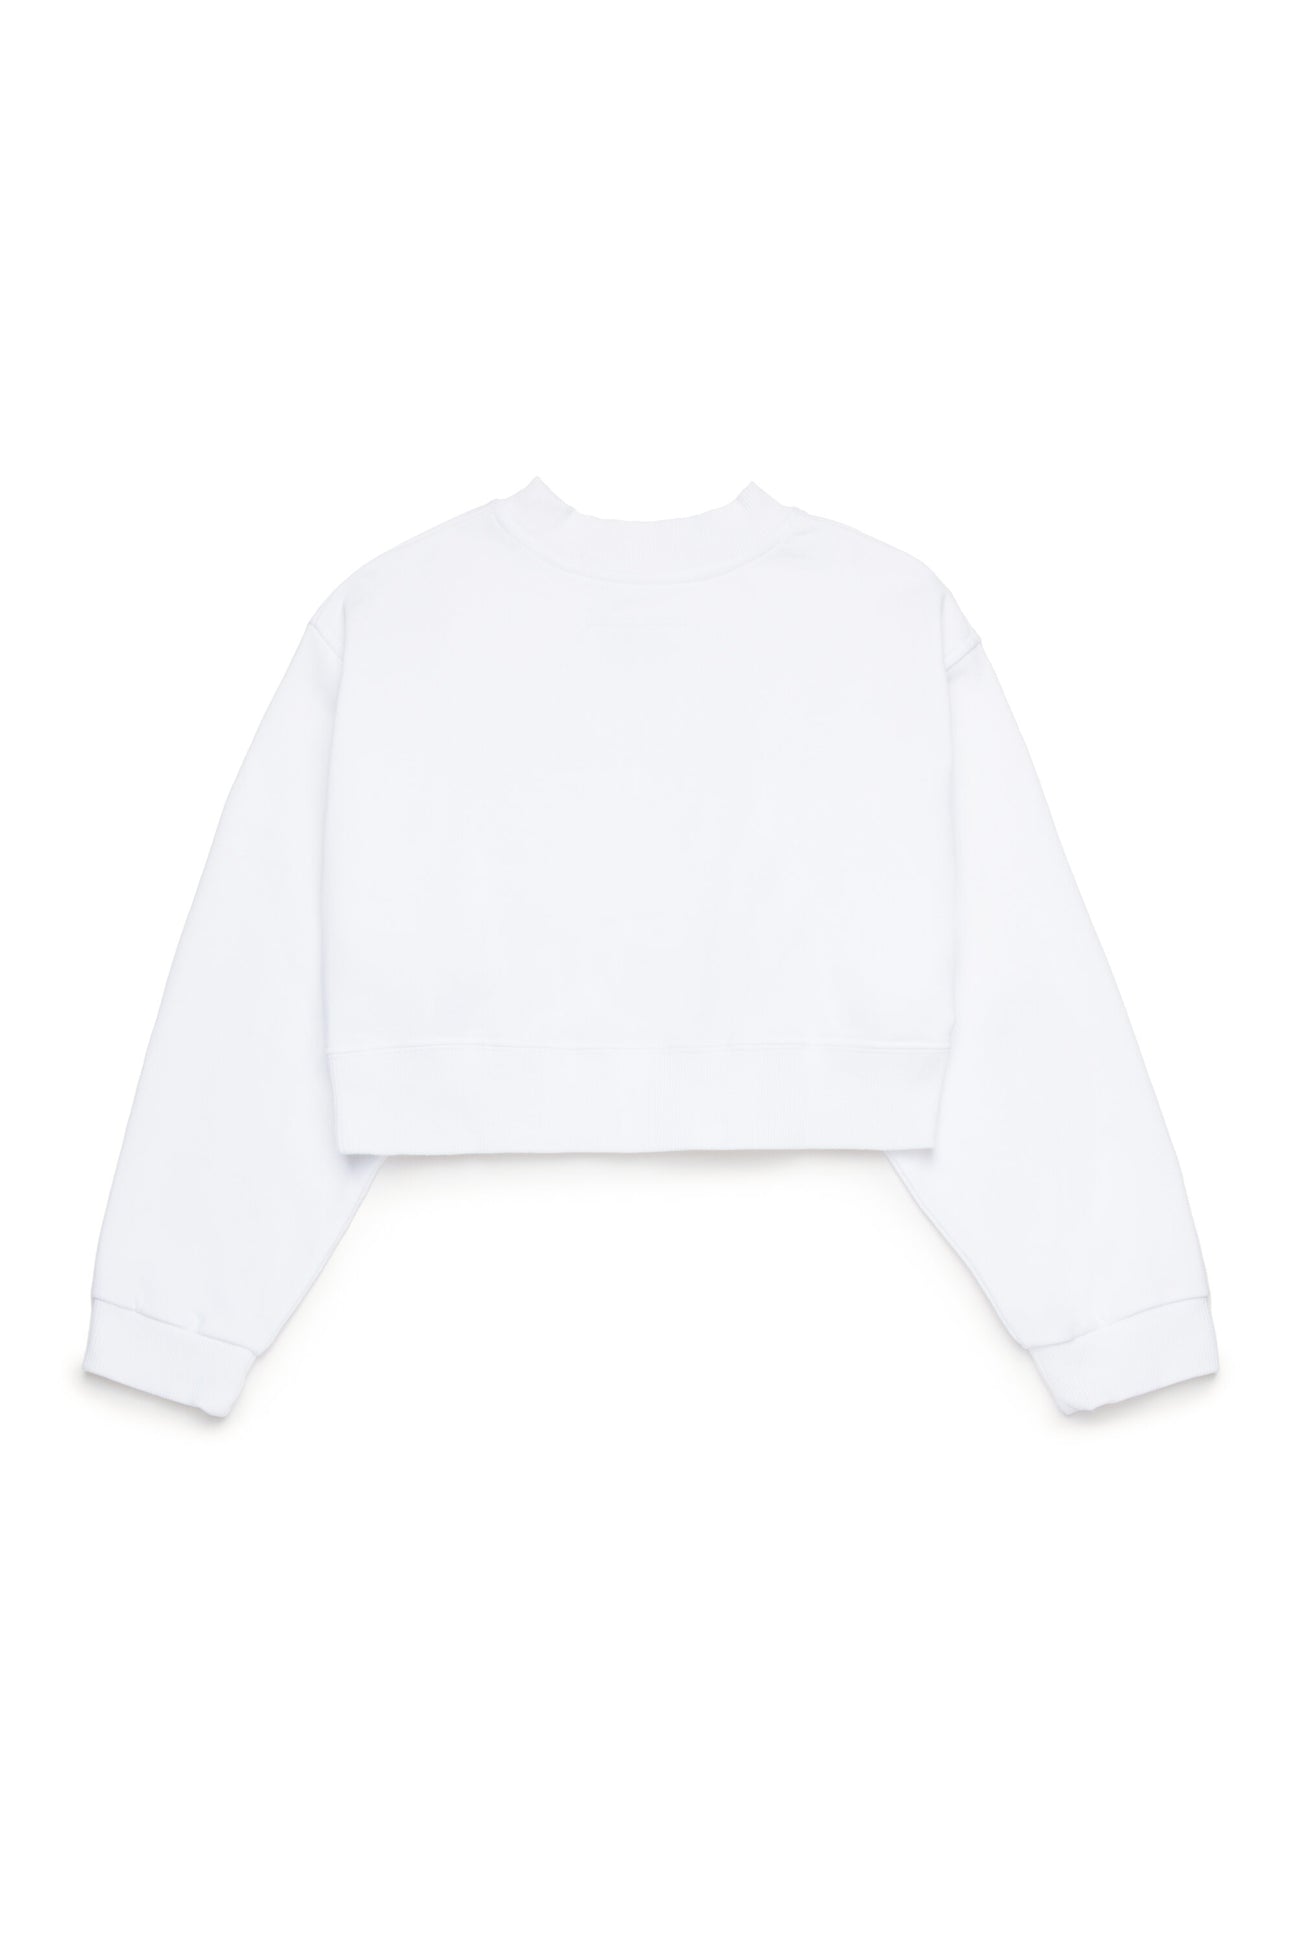 Cropped sweatshirt branded with pixel effect logo Cropped sweatshirt branded with pixel effect logo